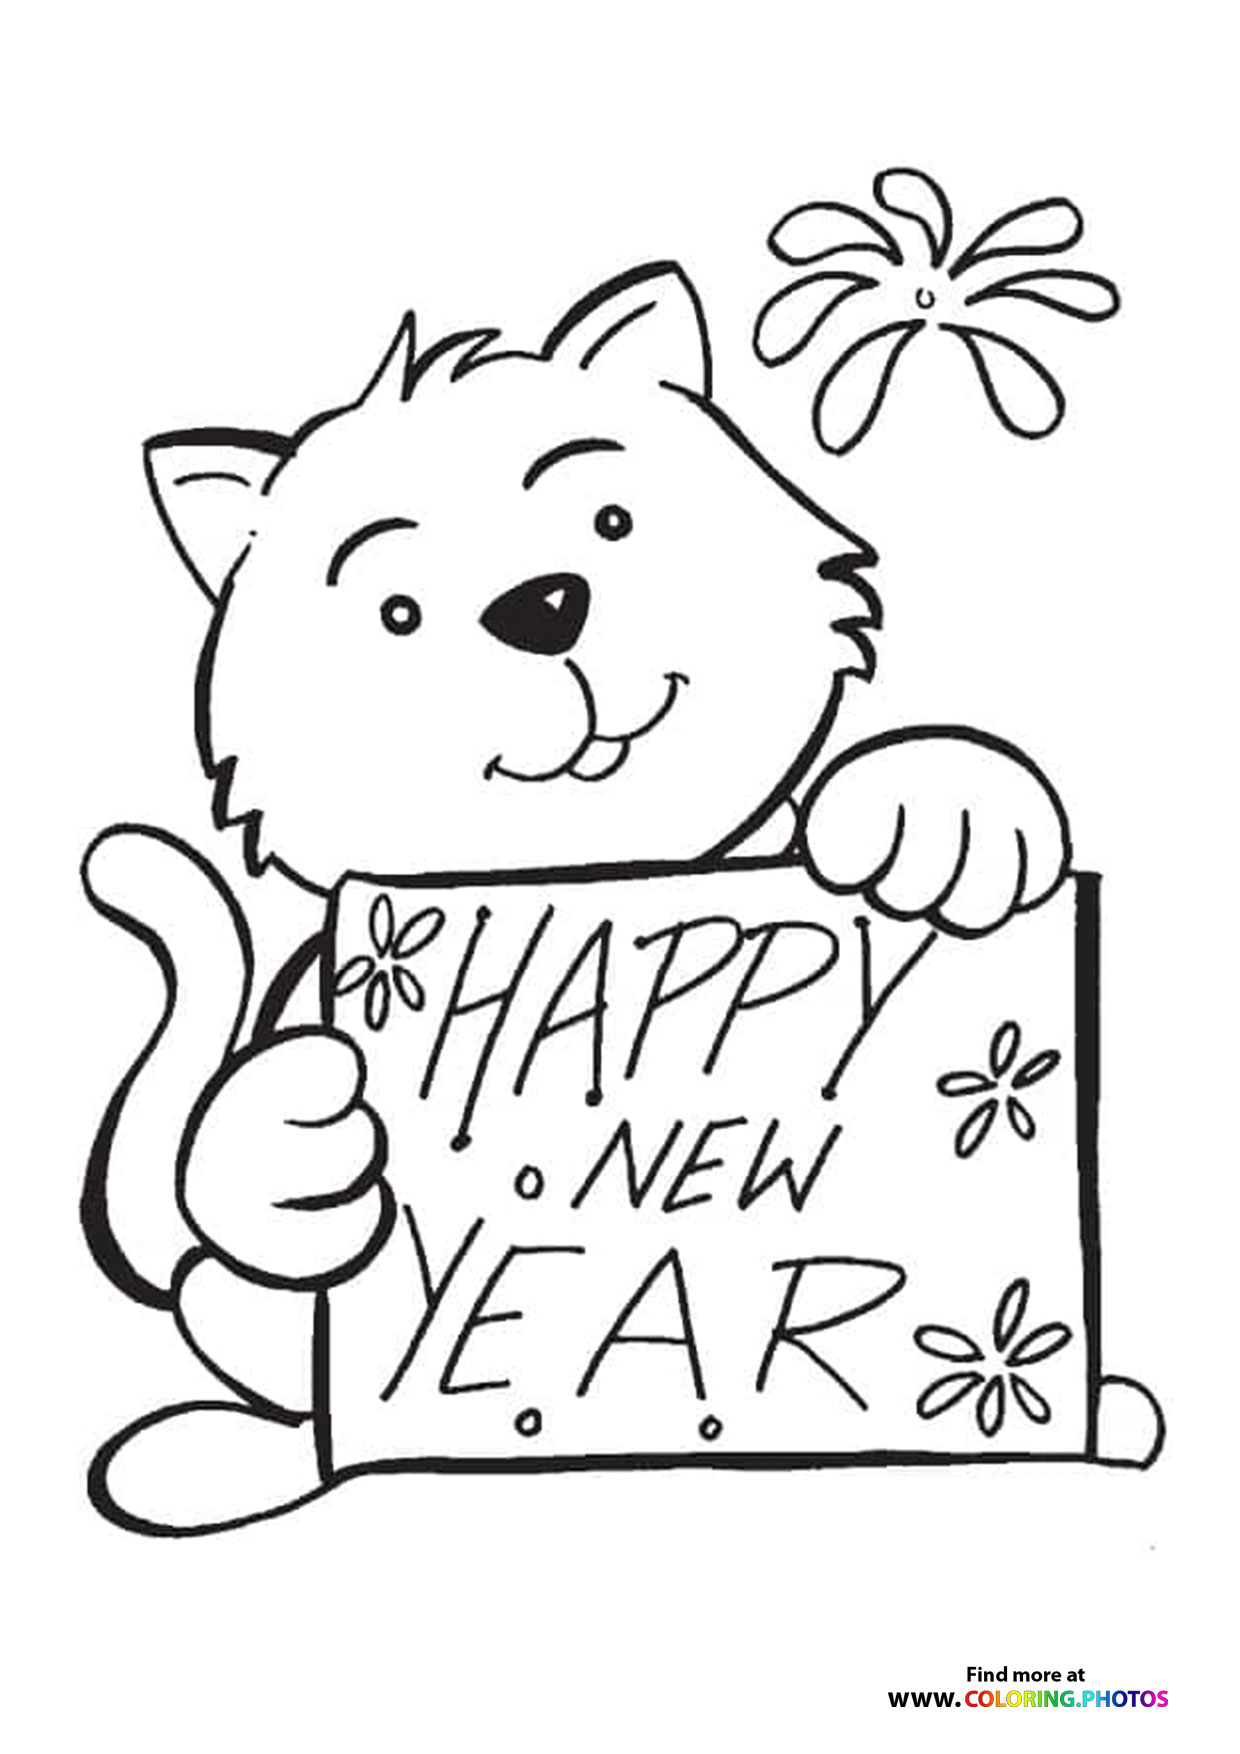 new-years-eve-coloring-pages-for-kids-free-and-easy-print-or-download